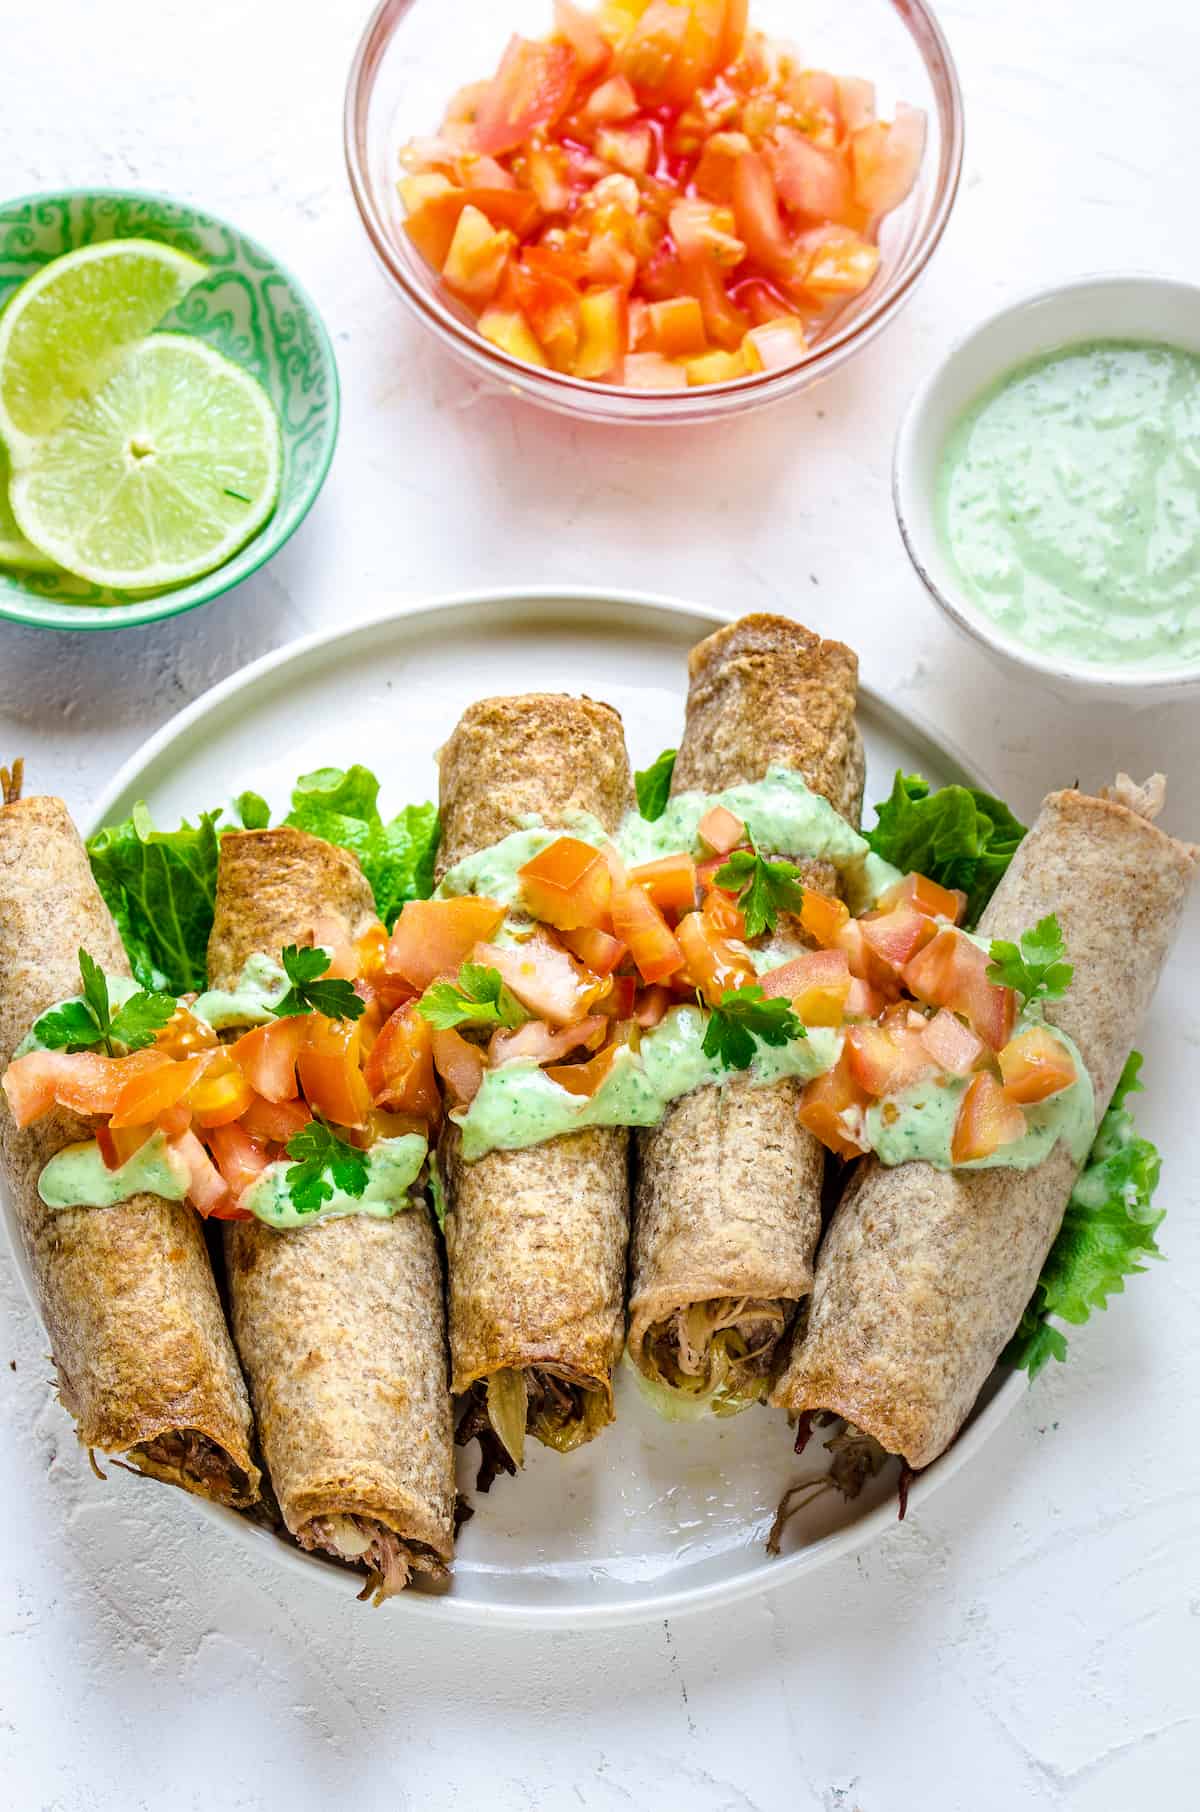 A round white plate with rolled, stuffed flour tortillas, topped with chopped veggies and creamy sauce. Sliced limes, chopped tomatoes, and more sauce are arranged around the plate in little cups.